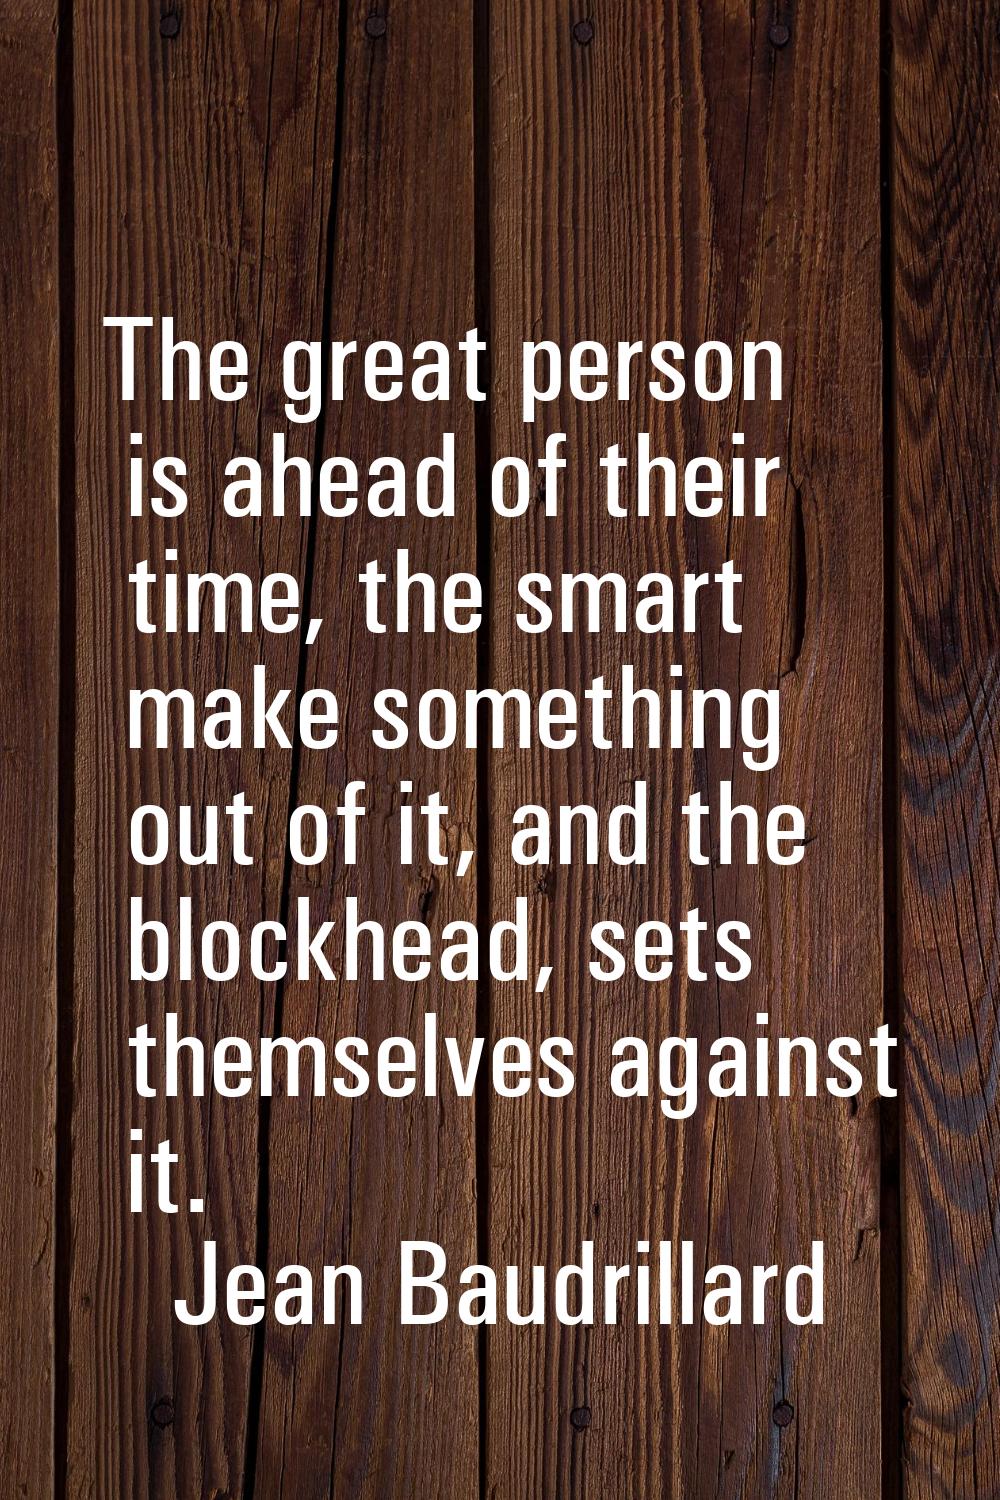 The great person is ahead of their time, the smart make something out of it, and the blockhead, set